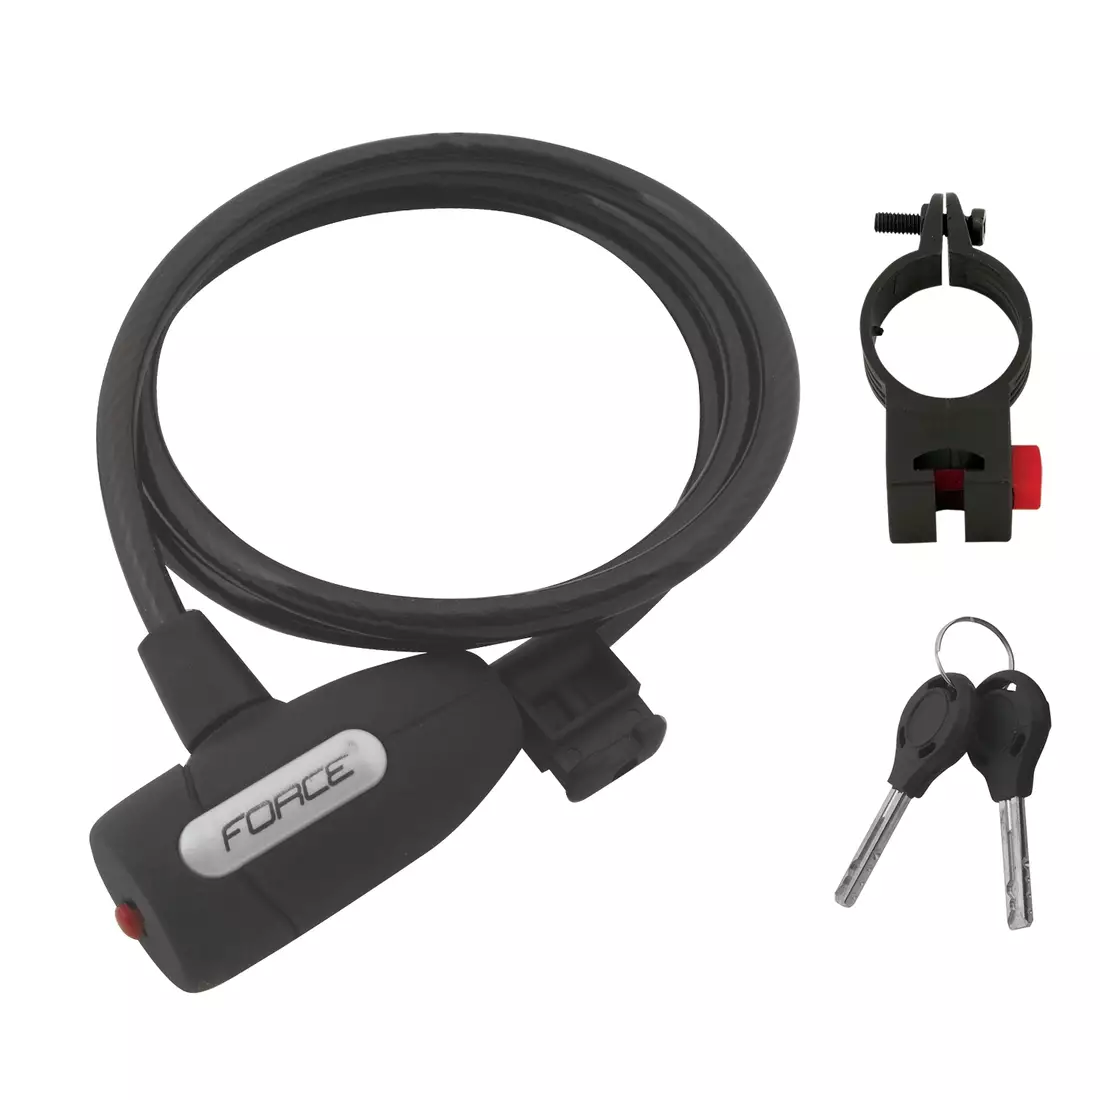 FORCE bicycle lock lux 120cm/8mm 49136